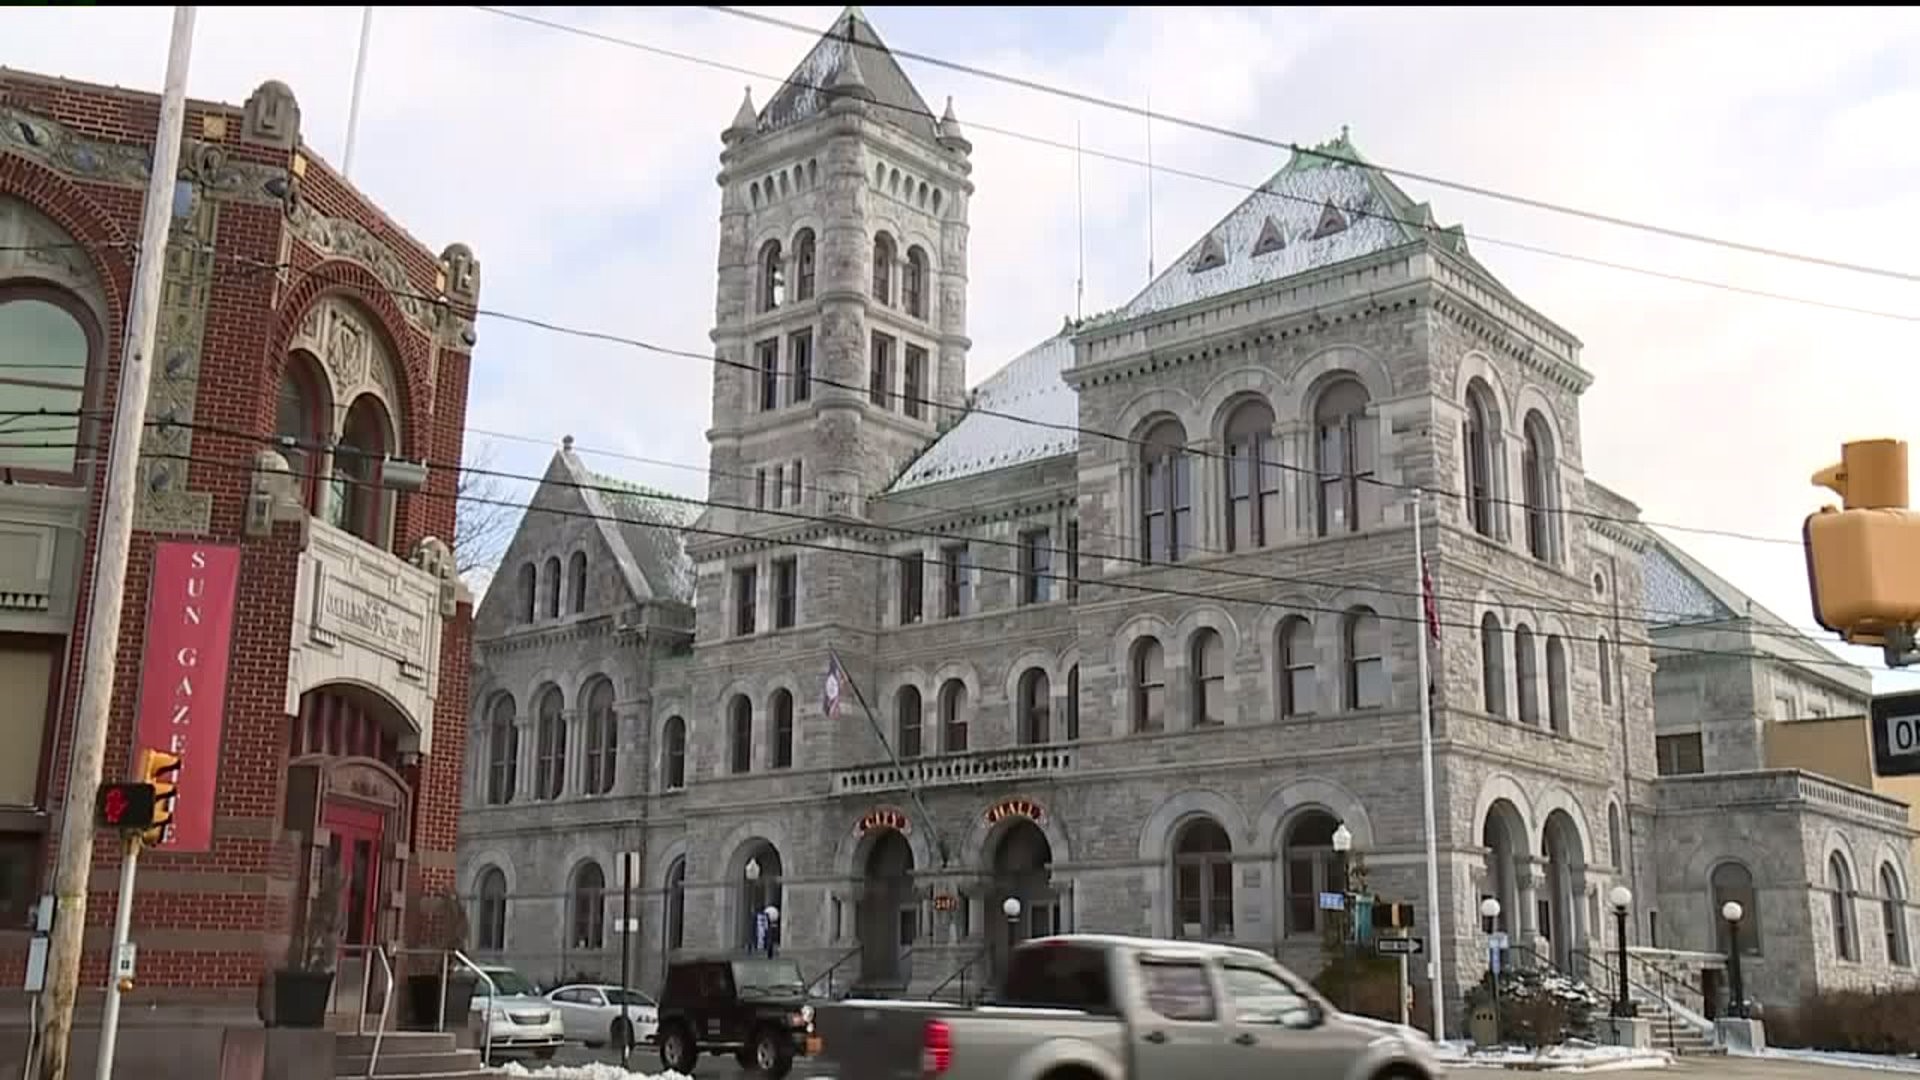 Big Price Tag for Renovations at Williamsport City Hall